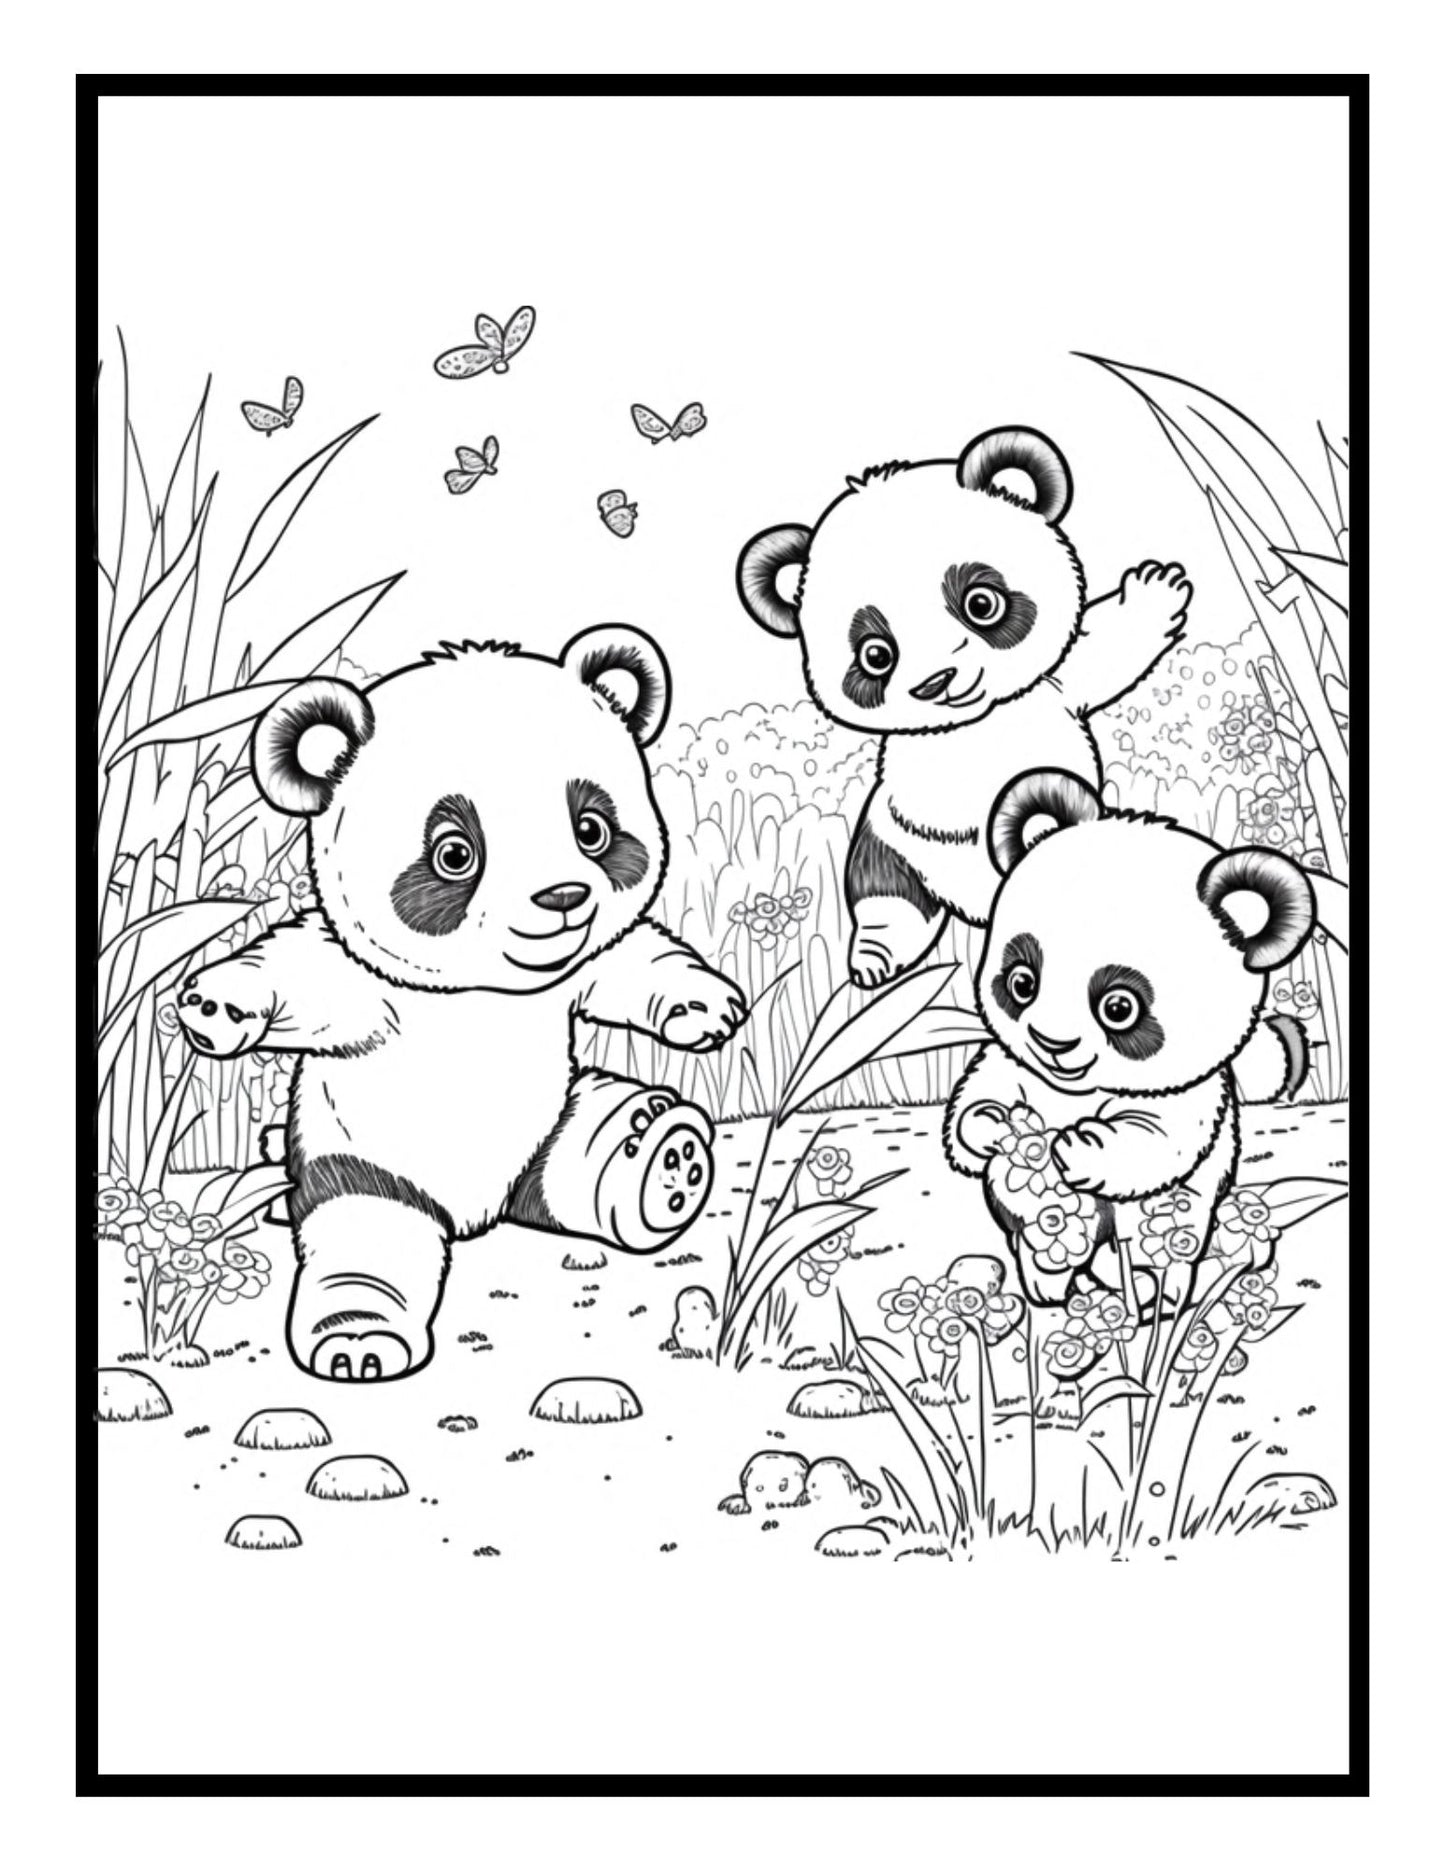 Cute Panda Coloring Book Jungle Animal Coloring Sheets For Kids Teens And Adults Coloring Pages Stress Relief Panda Zoo Wild Animal Book